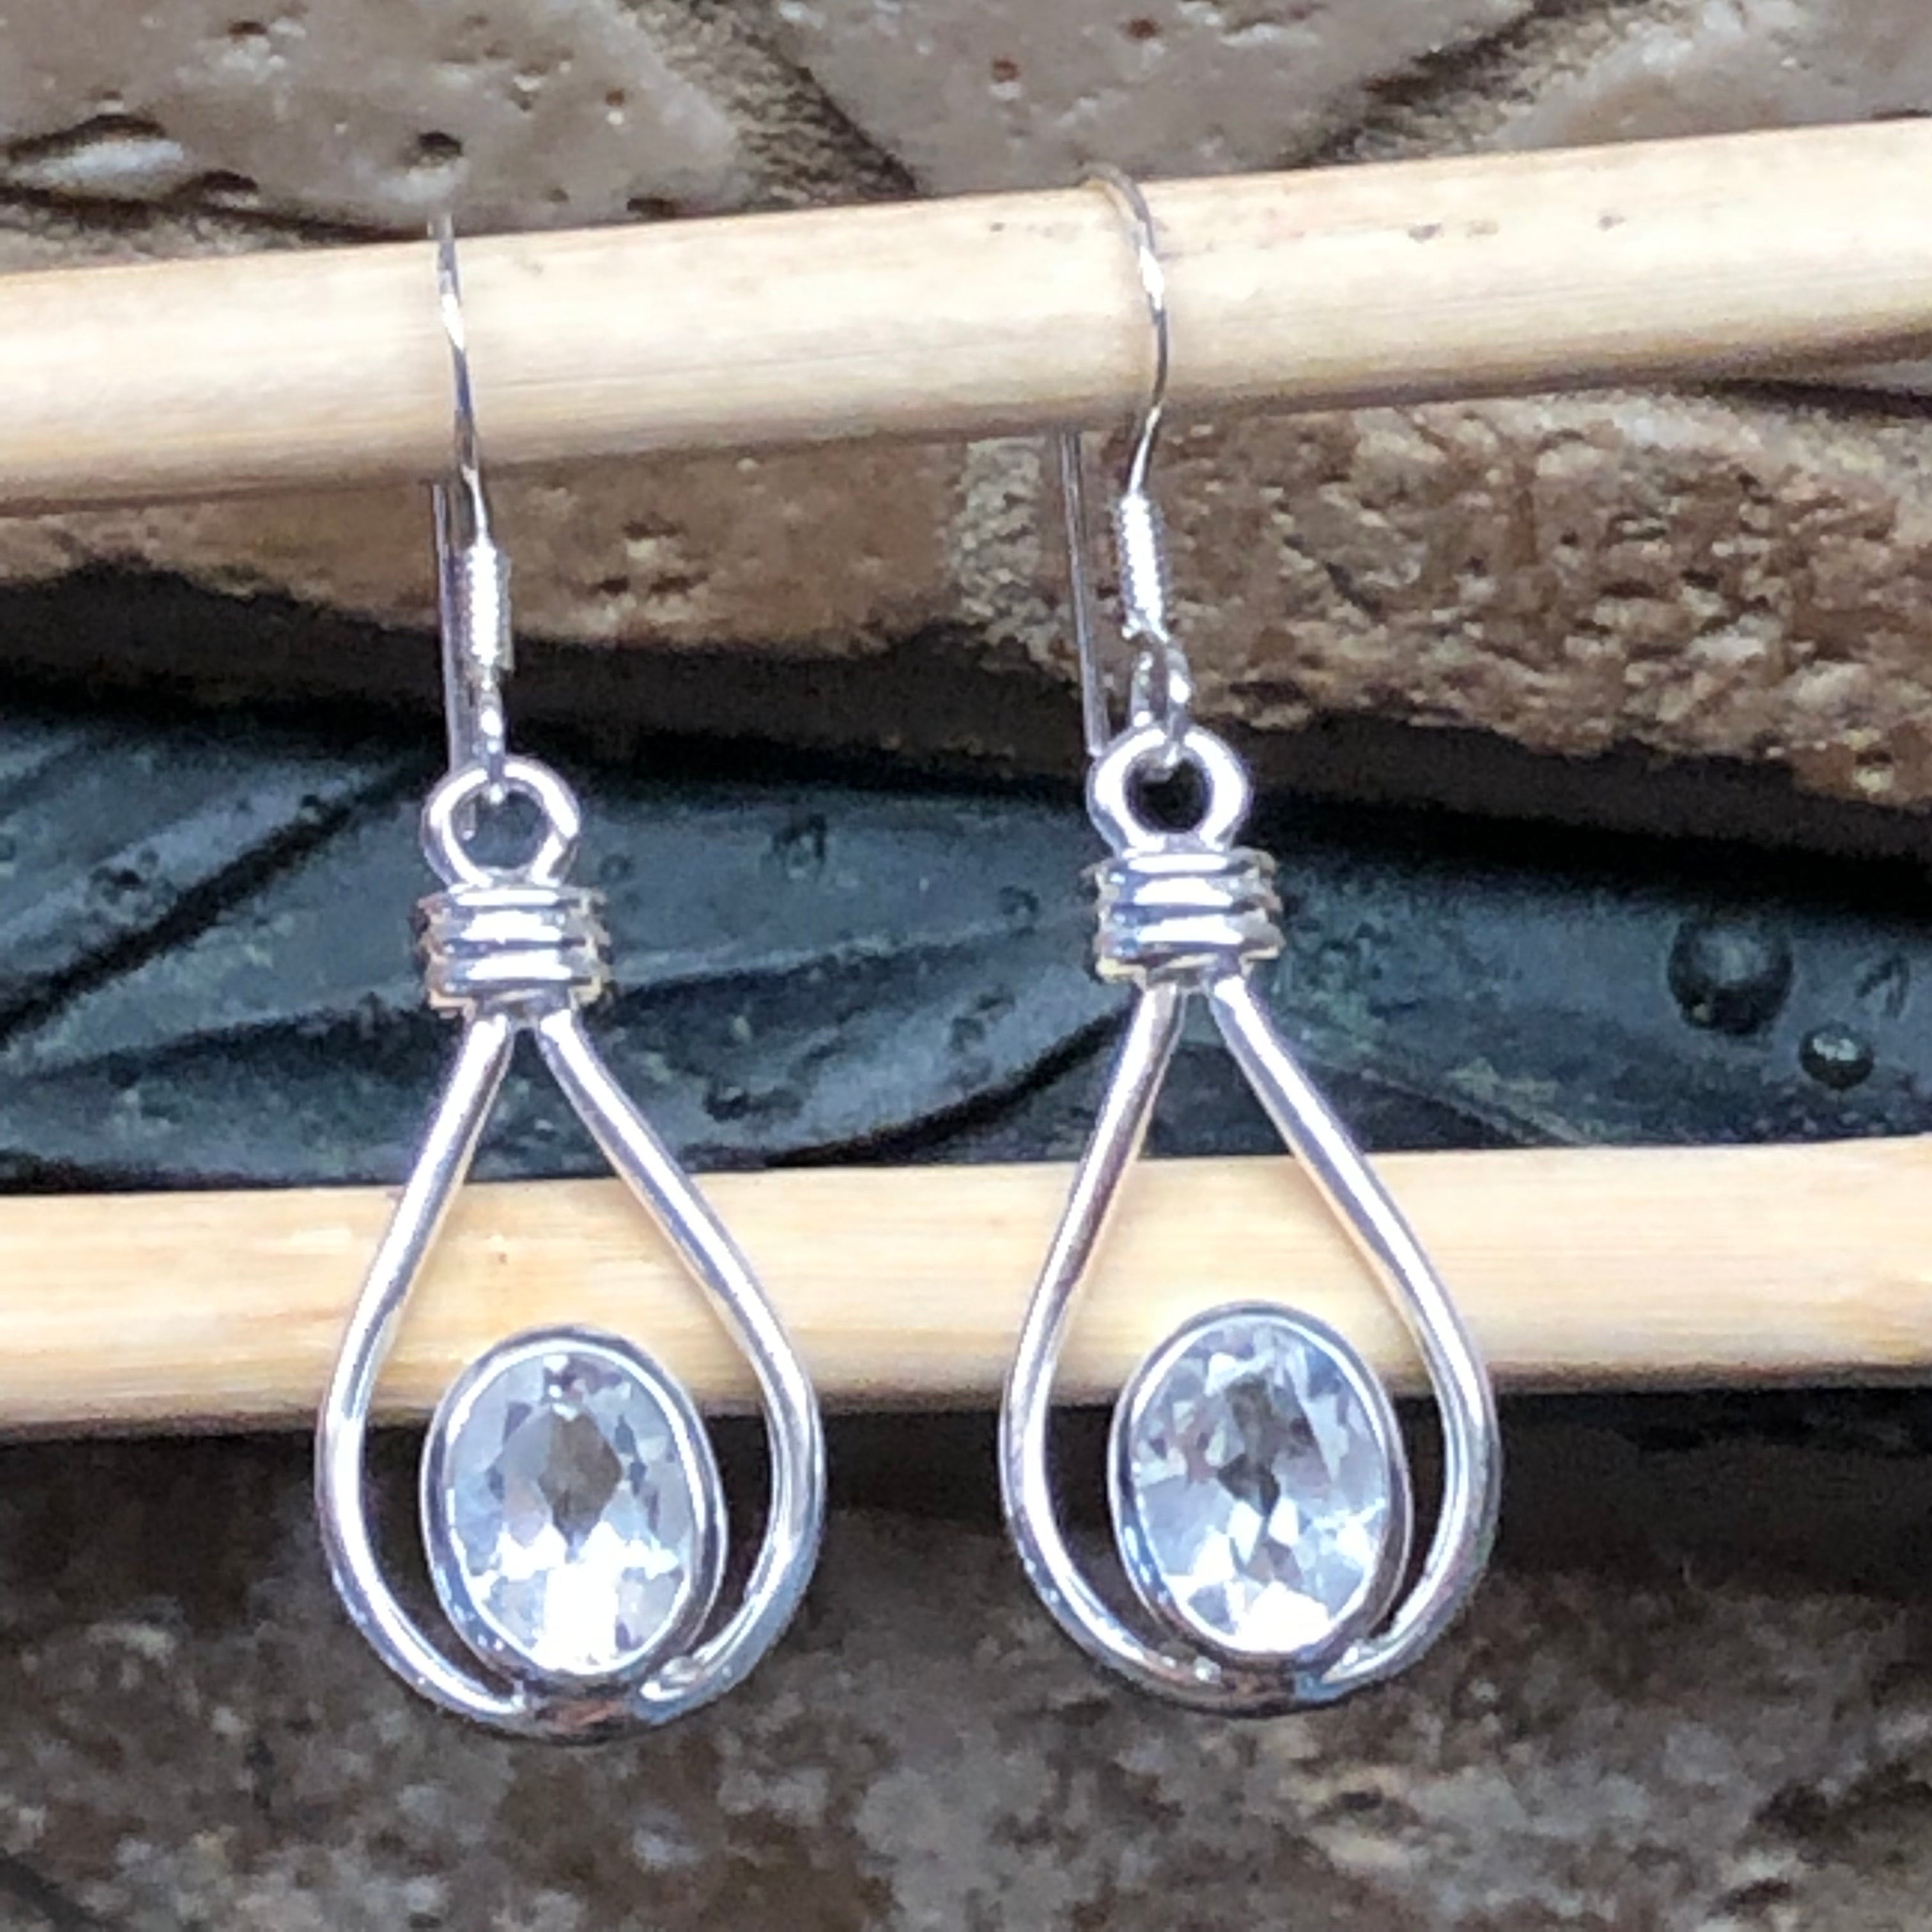 Genuine 2ct White Quartz 925 Solid Sterling Silver Earrings 35mm - Natural Rocks by Kala